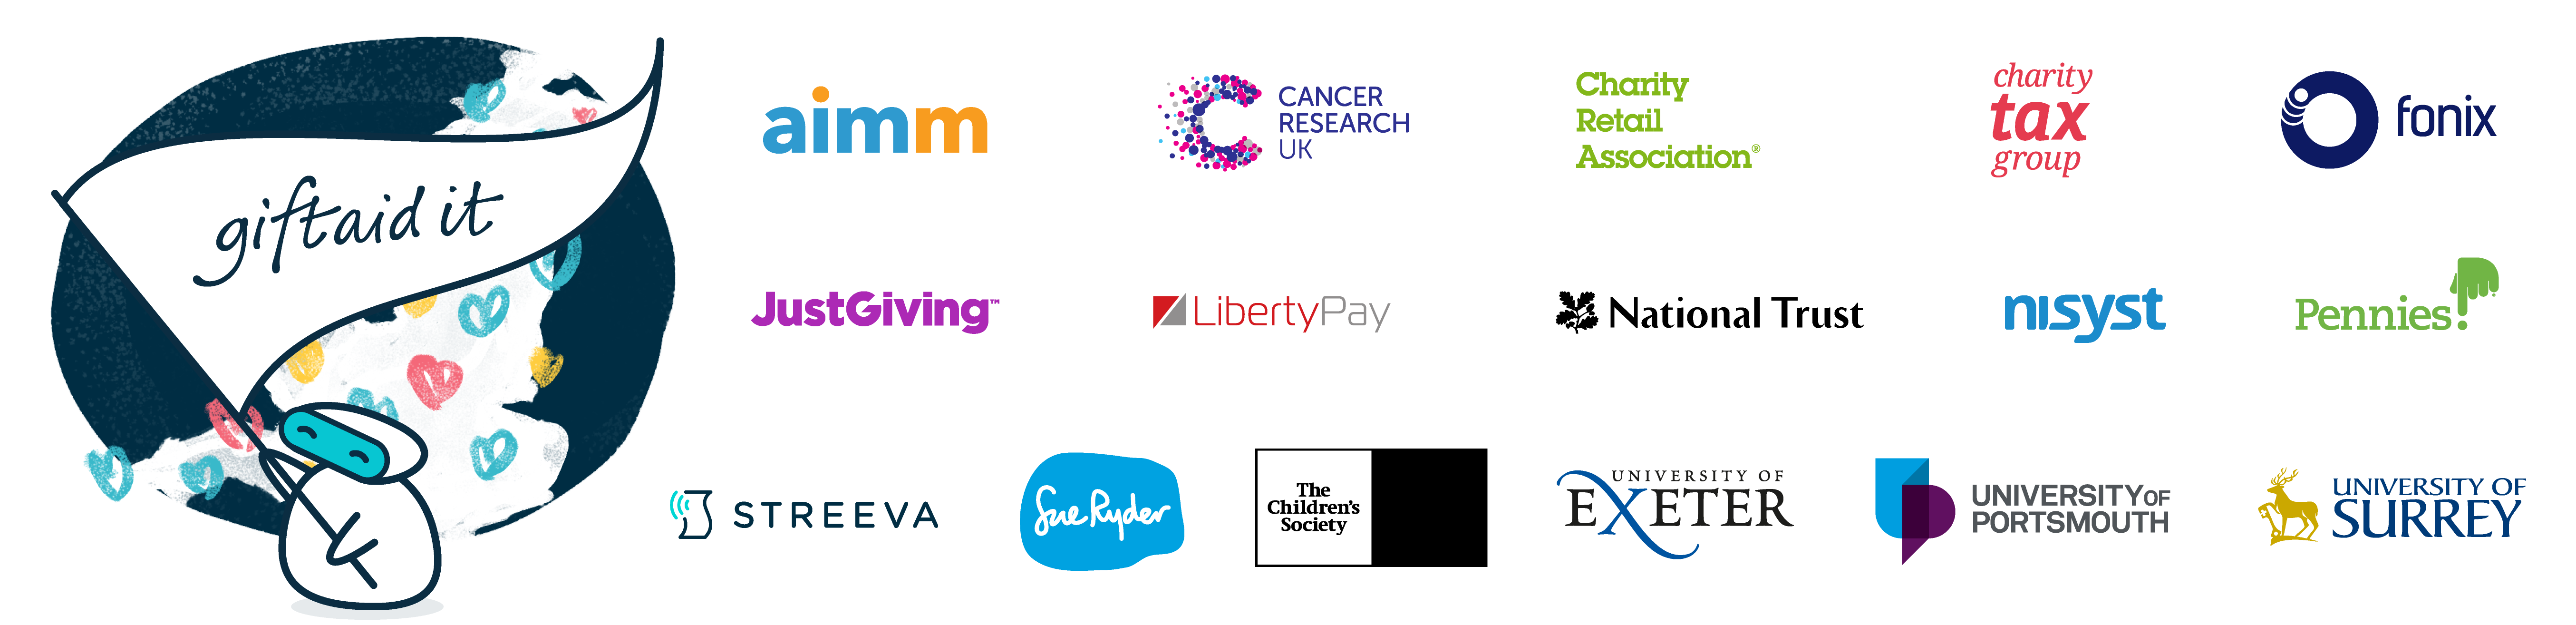 An image of logos showing all those involved with the Future of Gift Aid project